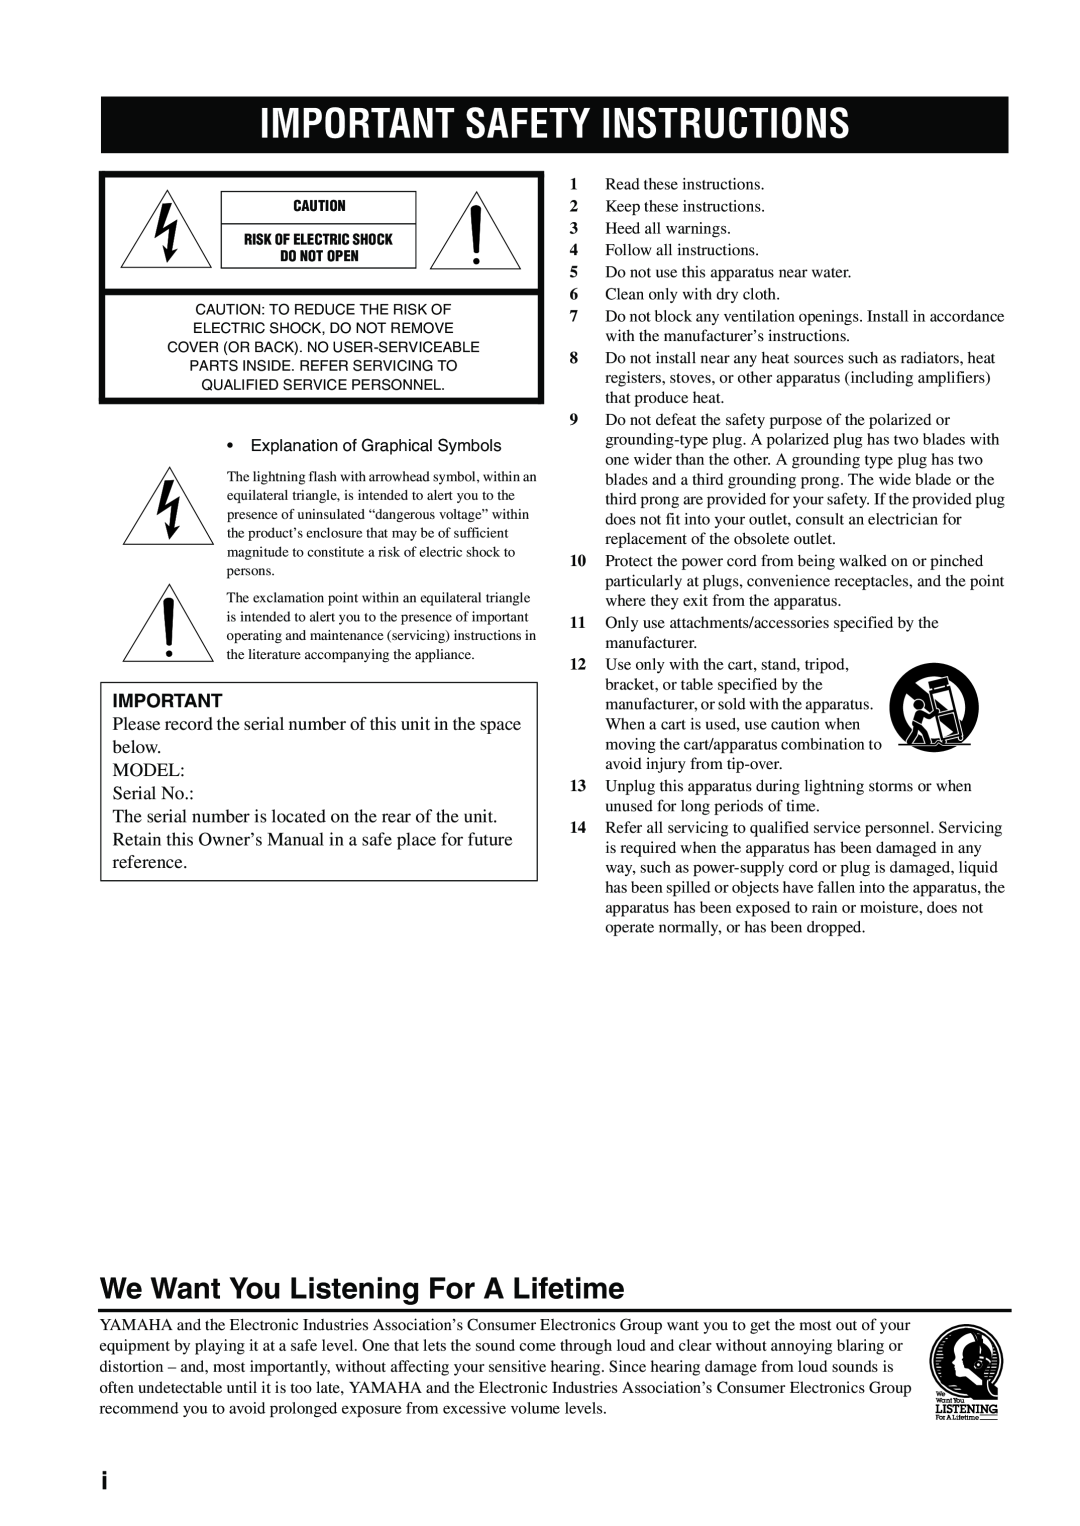 Yamaha AX-497, AX-397 owner manual Important Safety Instructions, We Want You Listening For A Lifetime 